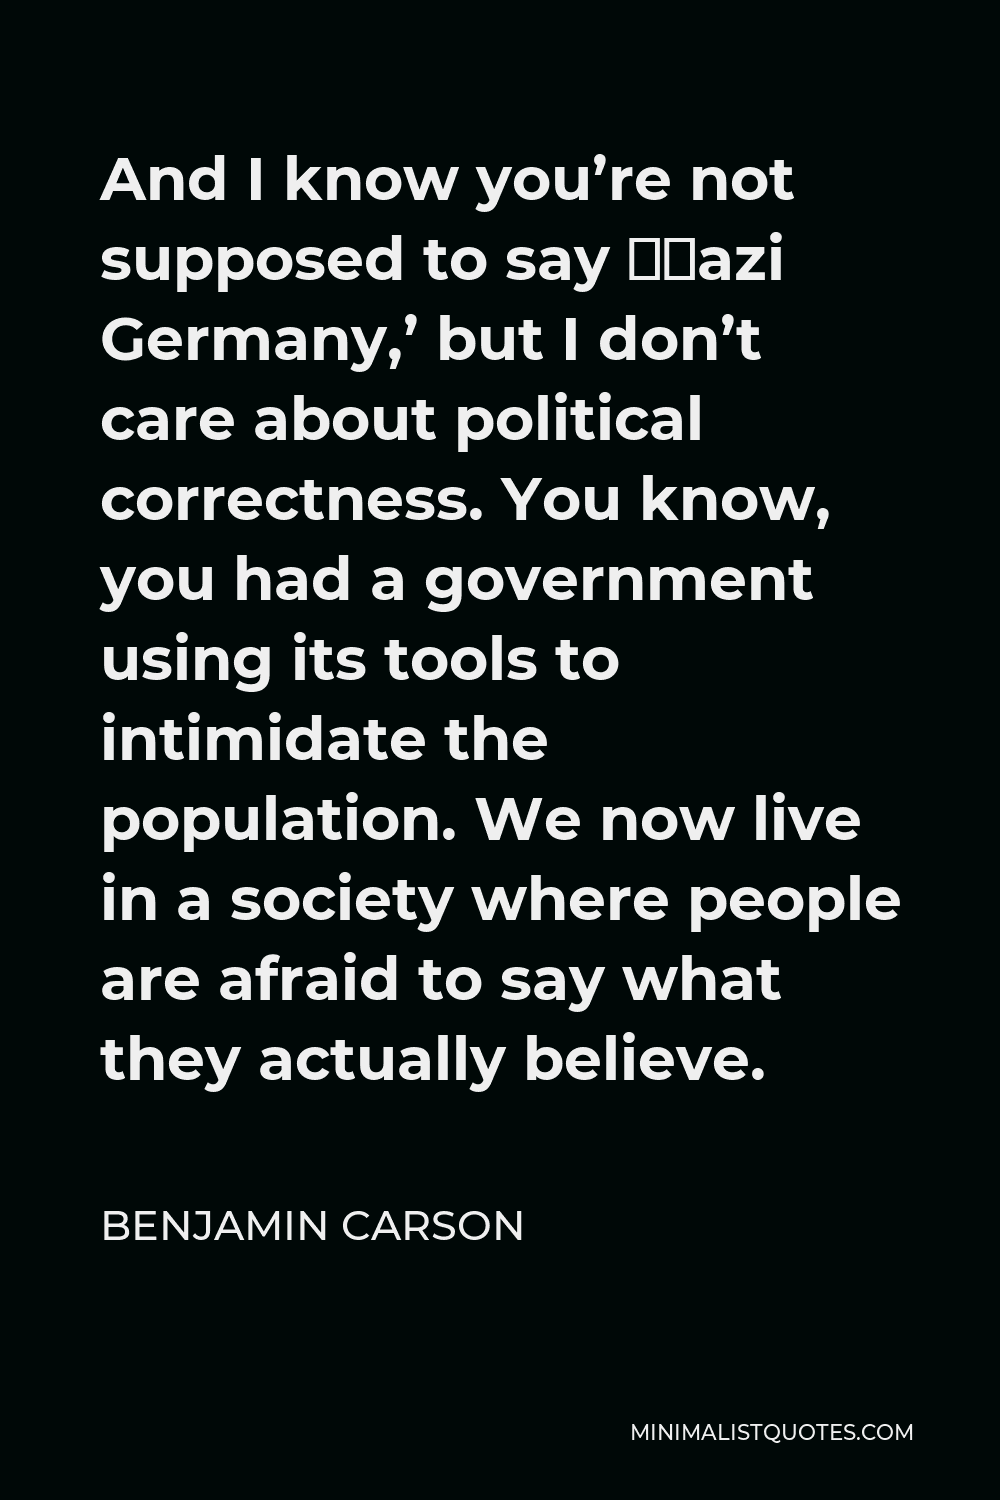 Benjamin Carson Quote - And I know you’re not supposed to say ‘Nazi Germany,’ but I don’t care about political correctness. You know, you had a government using its tools to intimidate the population. We now live in a society where people are afraid to say what they actually believe.